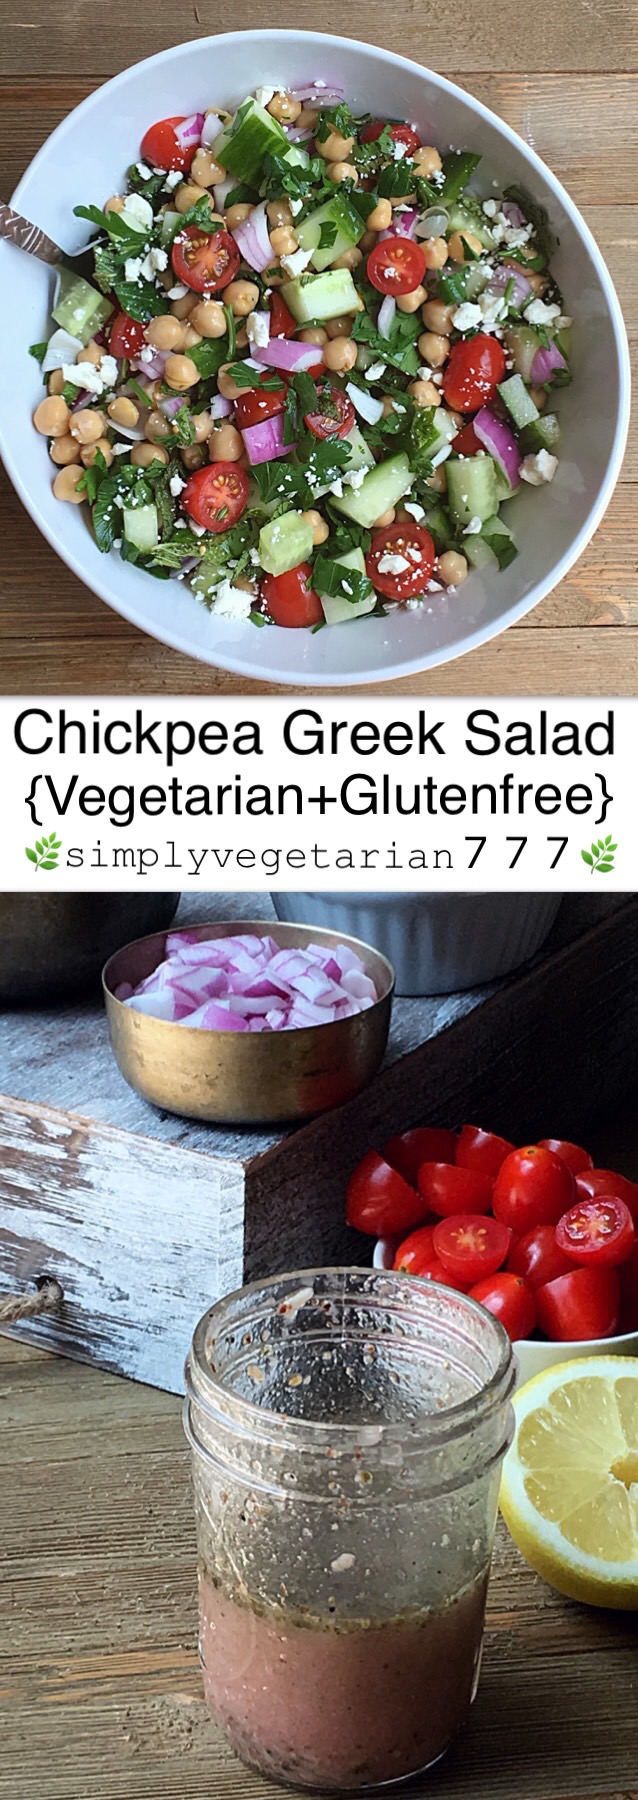 This Chickpeas Greek Salad is a super delicious recipe. It can be eaten as is as a salad or can be stuffed inside a pita or rolled in a wrap to make a mini meal. The salad is so easy to put together. Also, learn how to make Greek Salad Dressing at home with ease. #salad #greeksalad #vegetariansalad #easysalad #chickpeas #lightmeals #saladdressing #greek